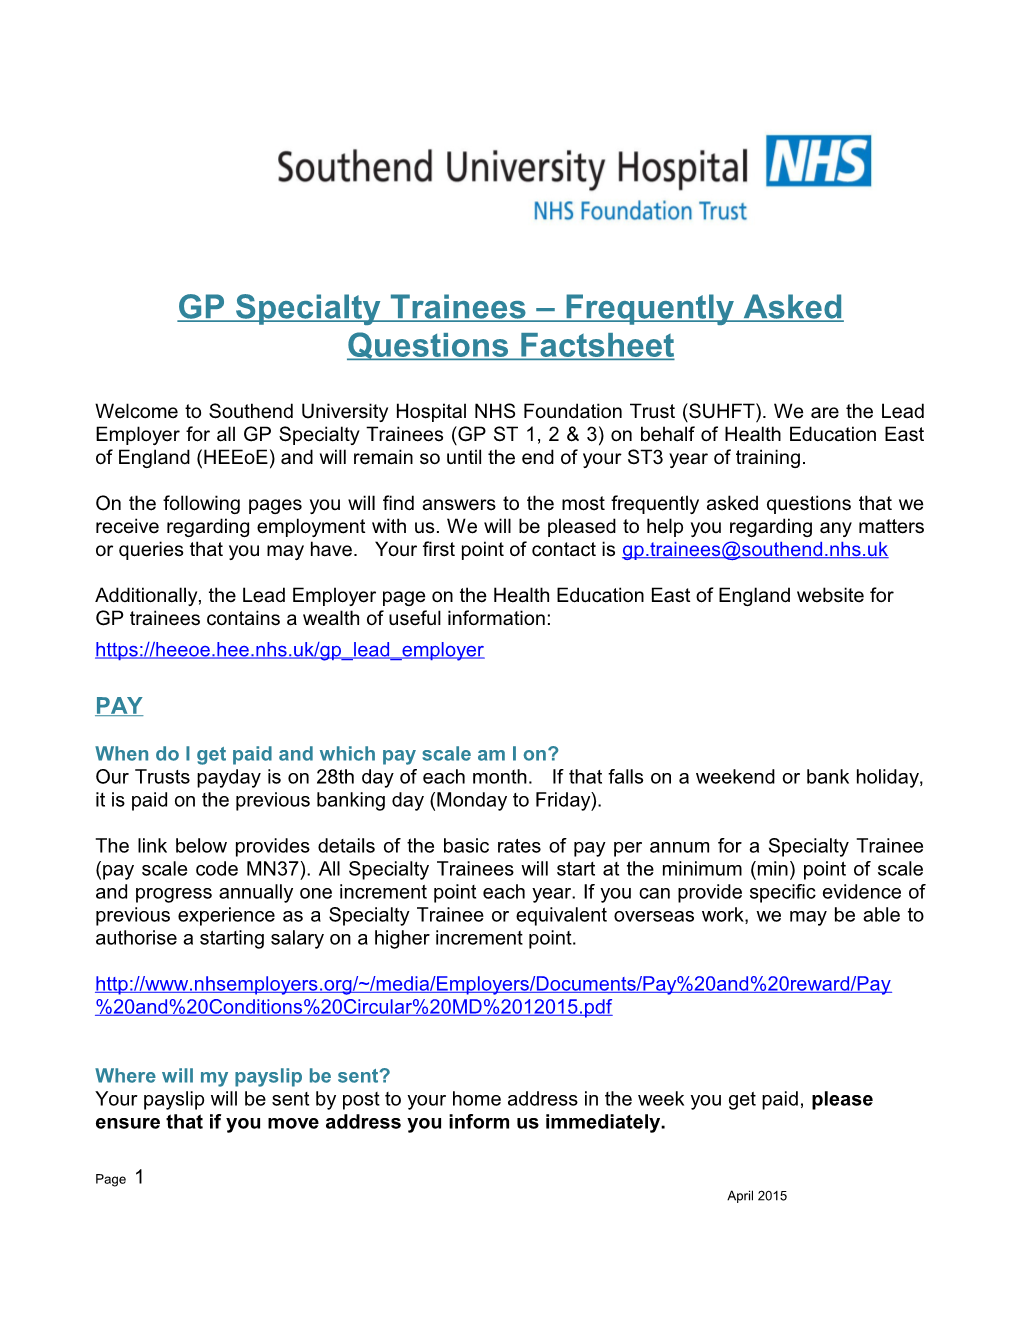 GP Specialty Trainees Frequently Asked Questions Factsheet